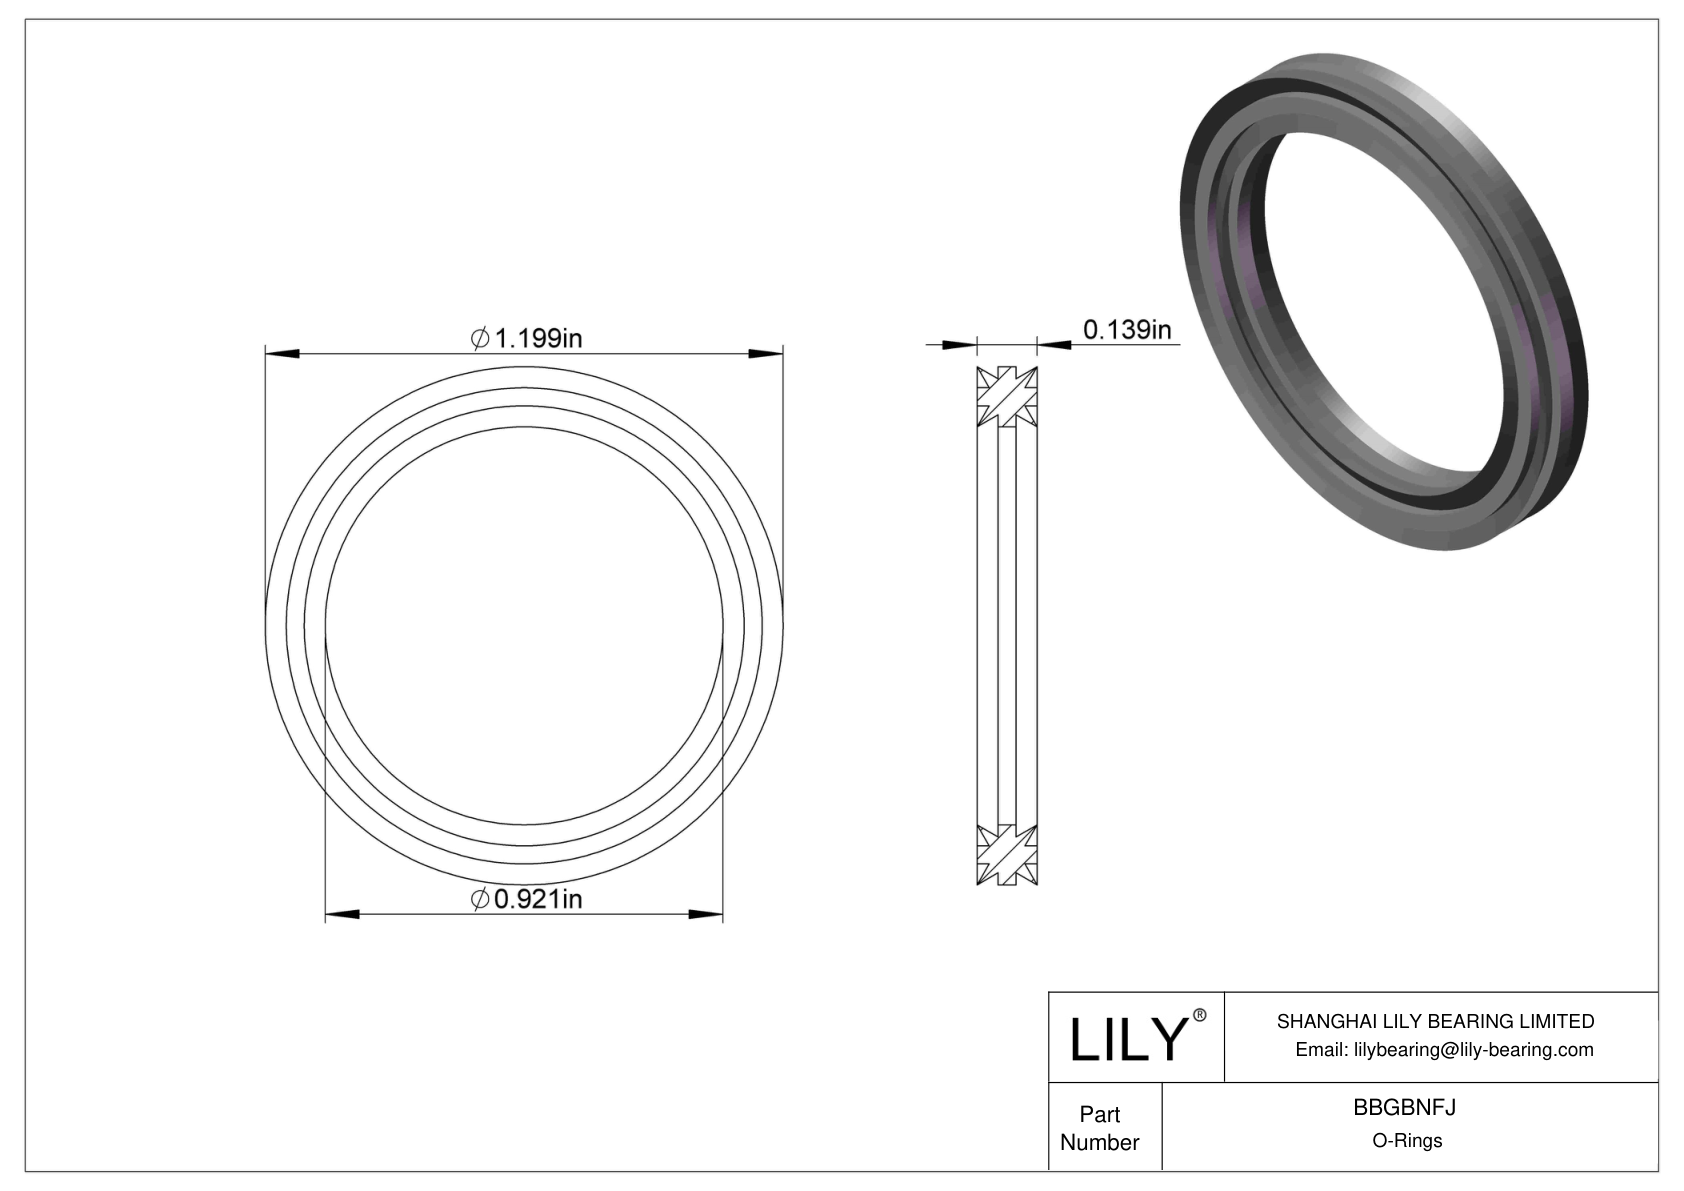 BBGBNFJ Oil Resistant O-Rings Double X cad drawing